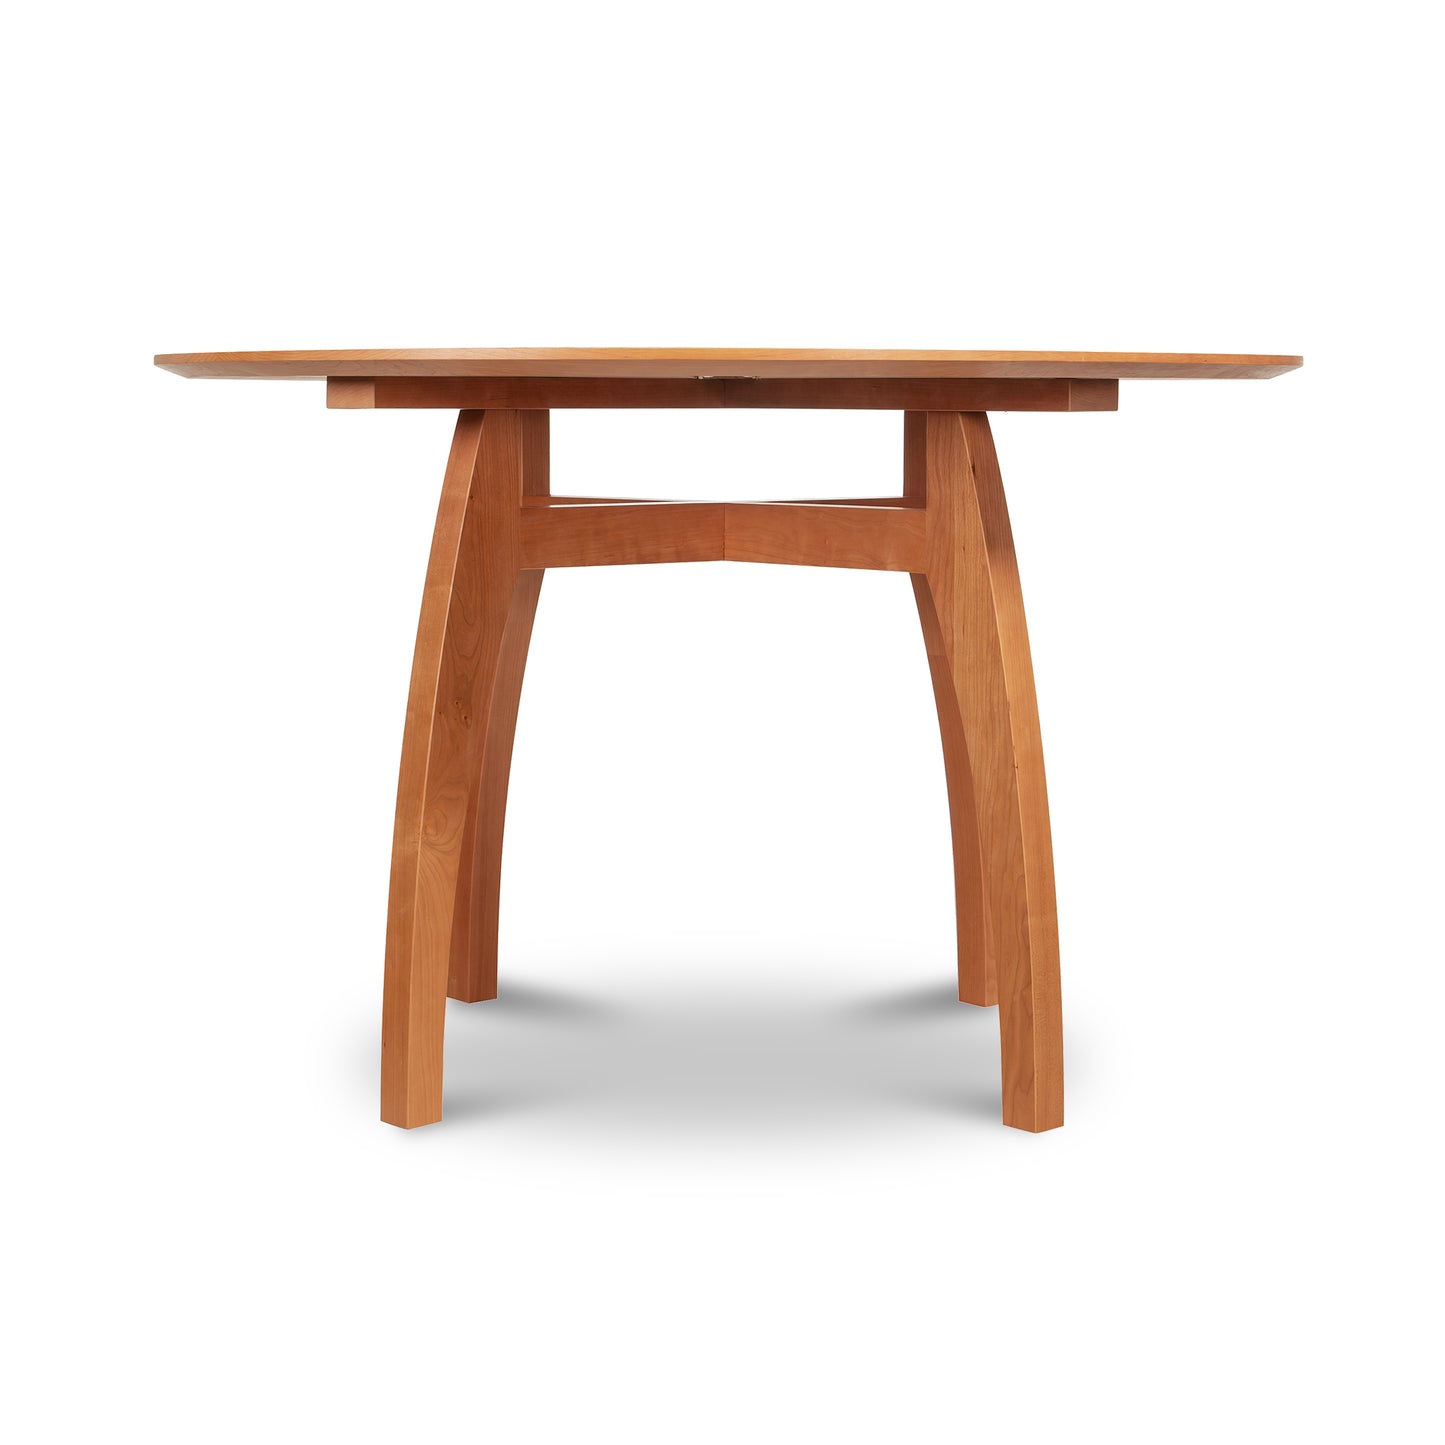 A round Lyndon Furniture Vermont Modern 48" Solid Top Pedestal Table - Floor Model with a wooden base, handmade in Vermont.